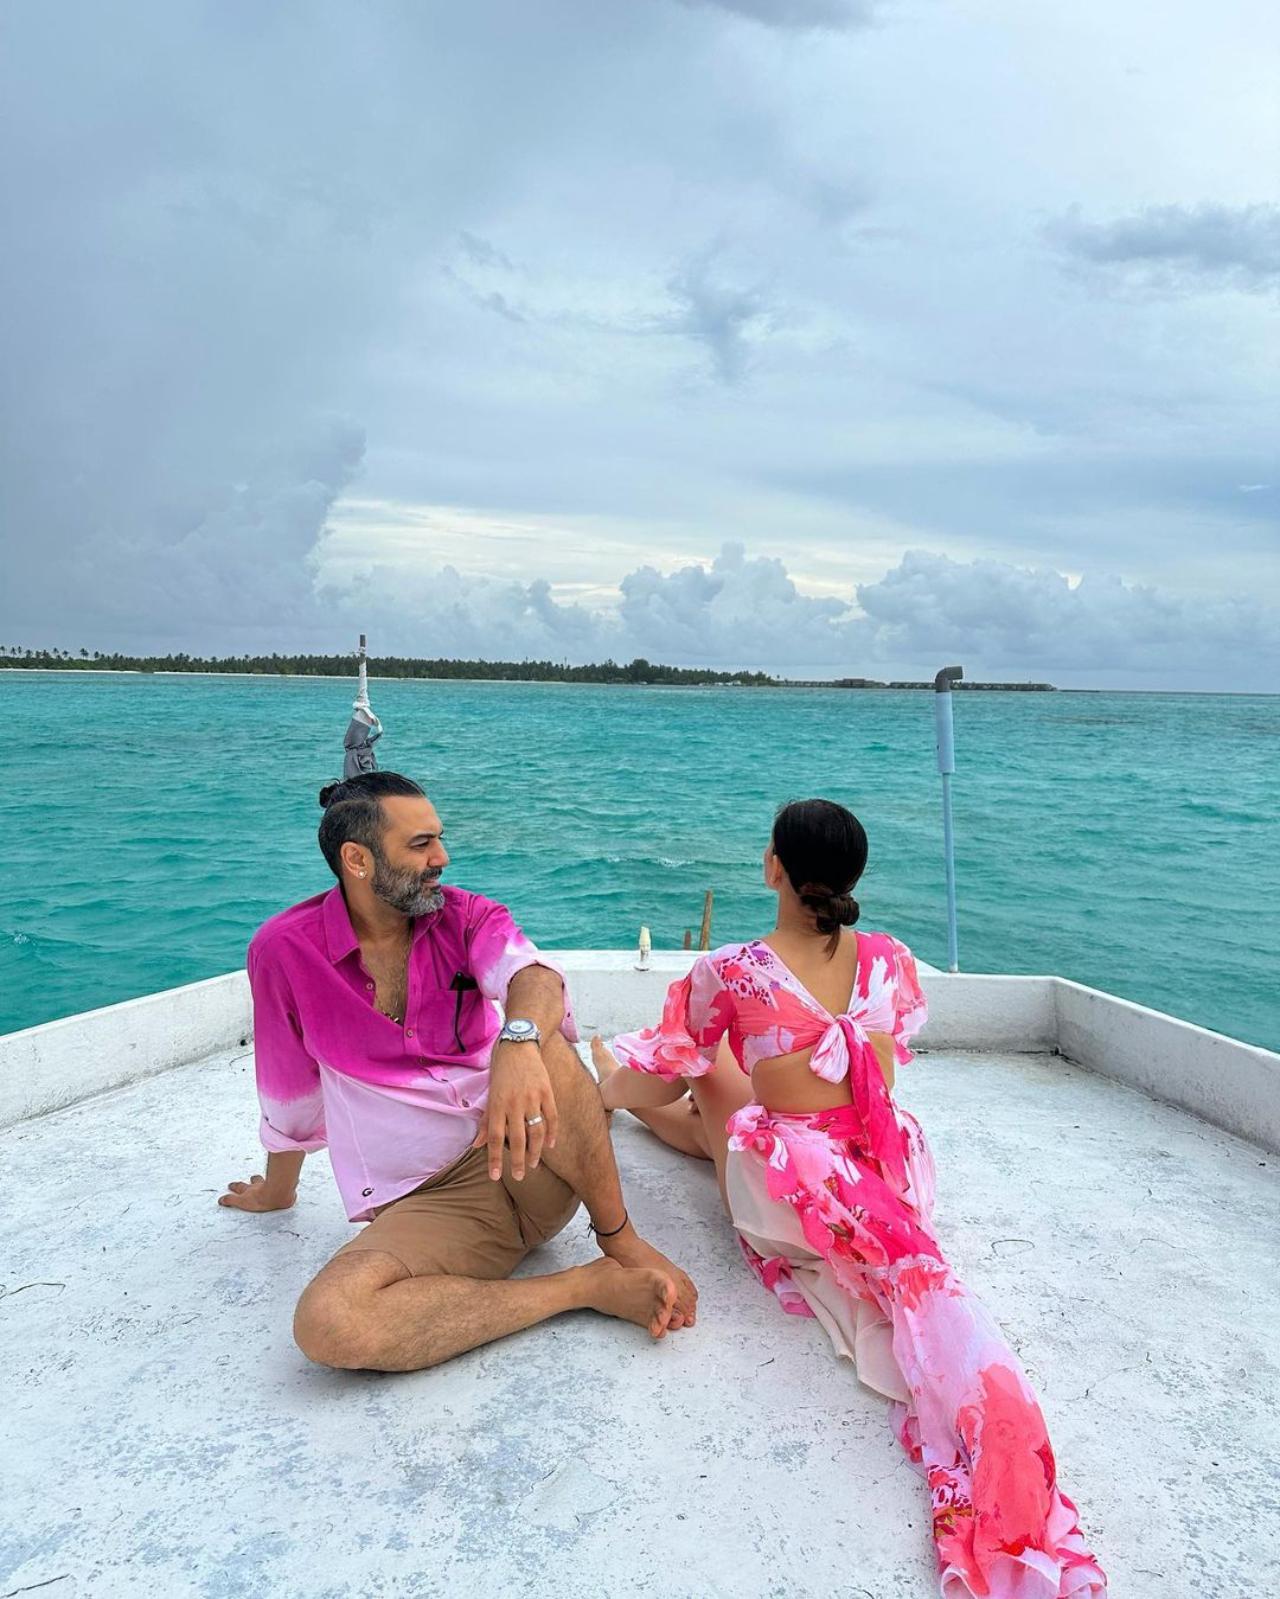 Sonnalli also included pictures with her husband Ashesh. Here, he gazes at her on their cruise while she looks out to sea. The back cut-outs on the dress are also visible in this angle